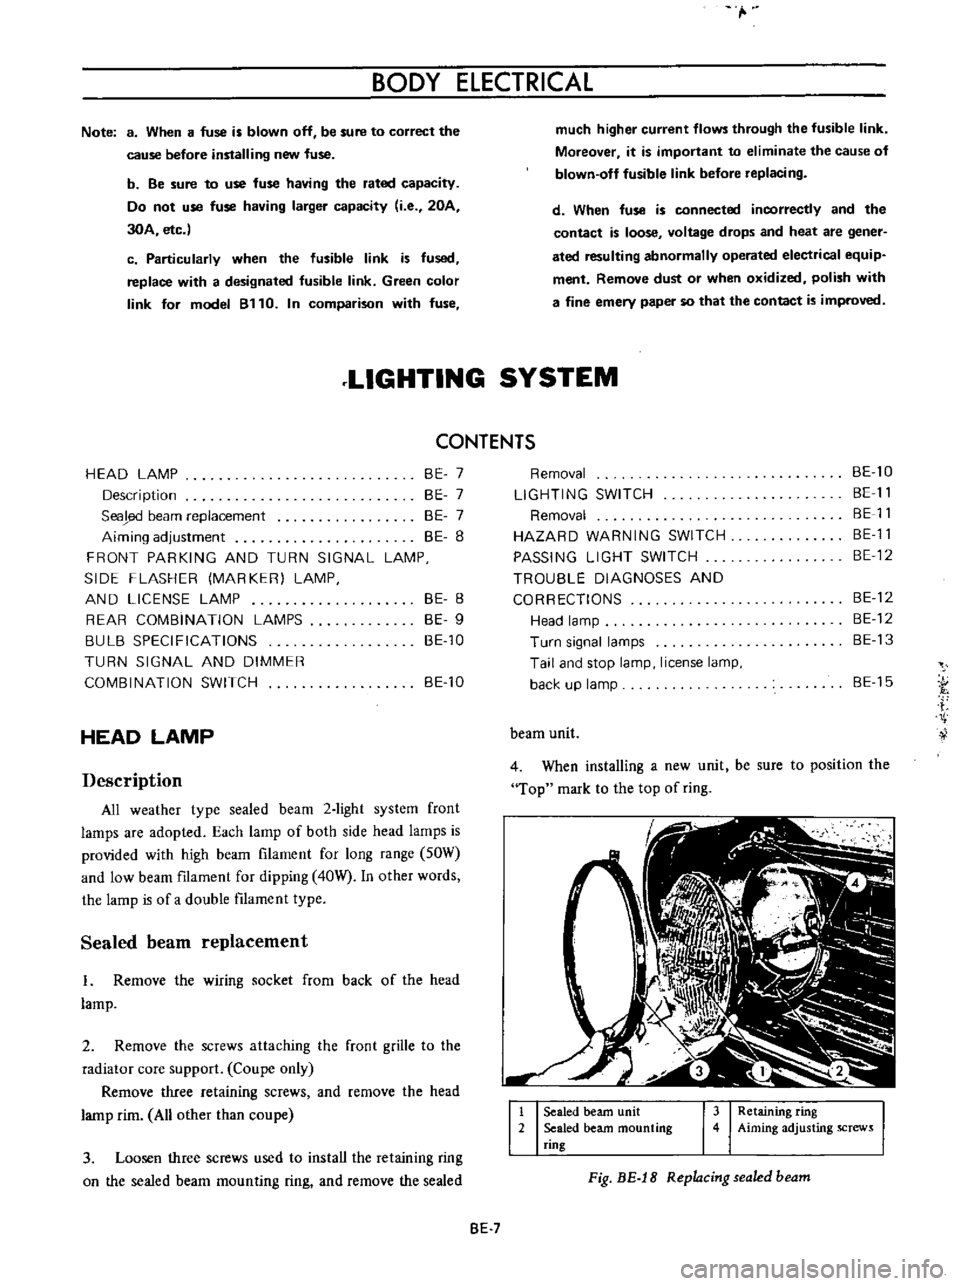 DATSUN B110 1973  Service Owners Guide 
BODY 
ELECTRICAL

Note 
8 
When 
a 
fuse 
is 
blown 
off 
be 
sure 
to 
correct 
the

cause 
before

installing 
new

fuse

b 
Be 
sure 
to 
use 
fuse

having 
the 
rated 
capacity

Do 
not 
use 
fus